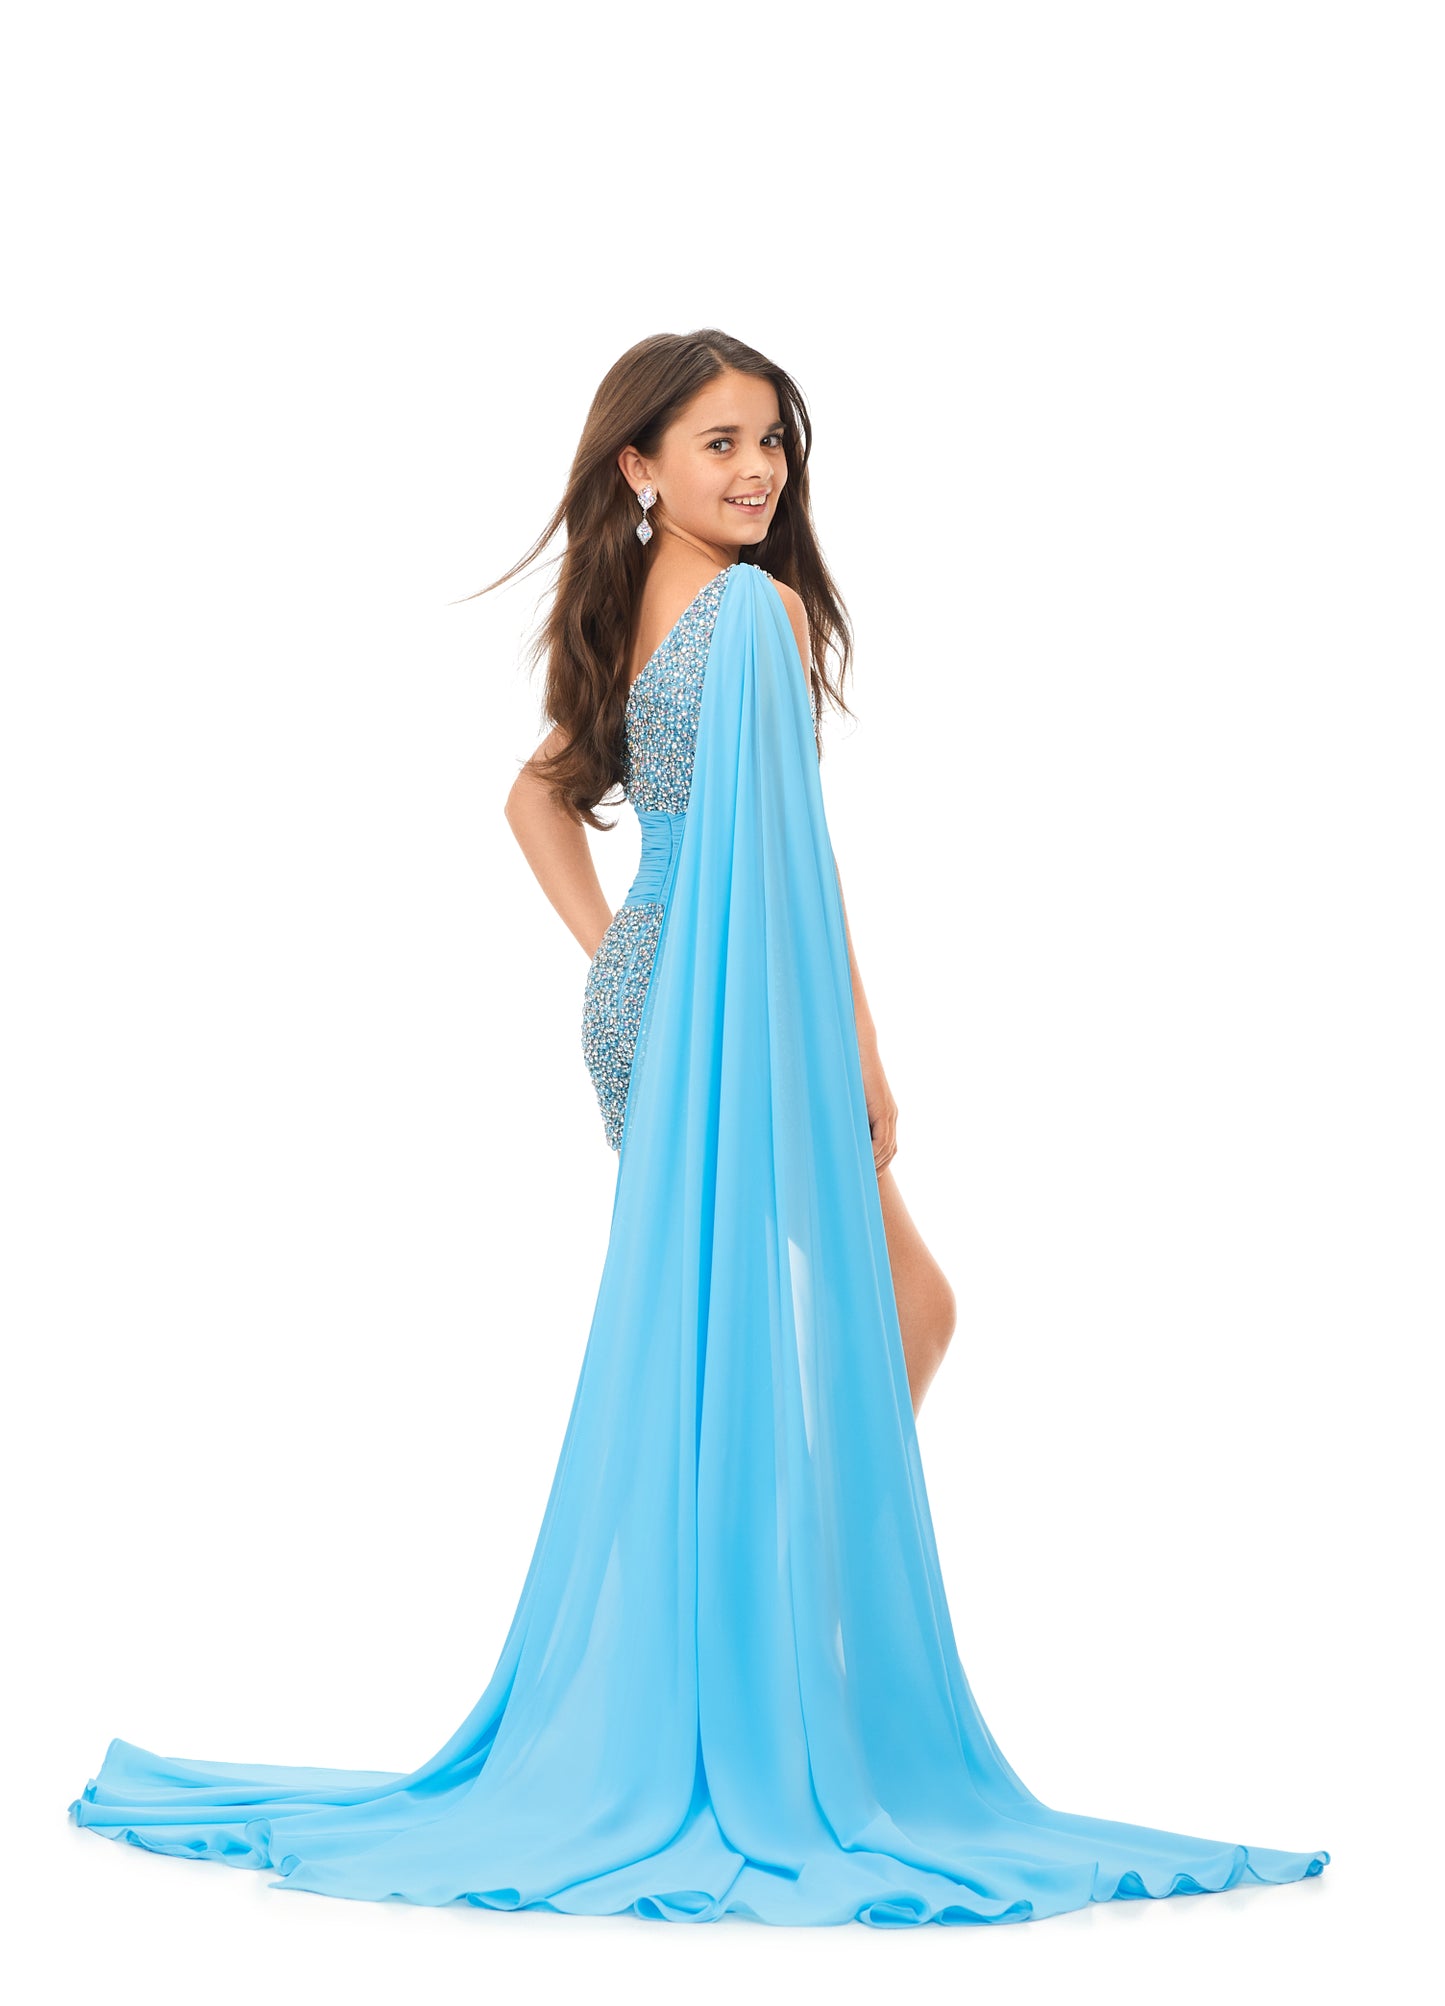 Ashley Lauren Kids 8151 One Shoulder Crystal Beaded Romper Chiffon Cape Pageant Fun Fashion This stunning kids one shoulder romper features pearls and crystals throughout. The look is completed with an attached chiffon shoulder cape. One Shoulder Chiffon Cape Romper COLORS: Orchid, Yellow, Neon Pink, Light Blue Sizes: 2,4,6,8,10,12,14,16